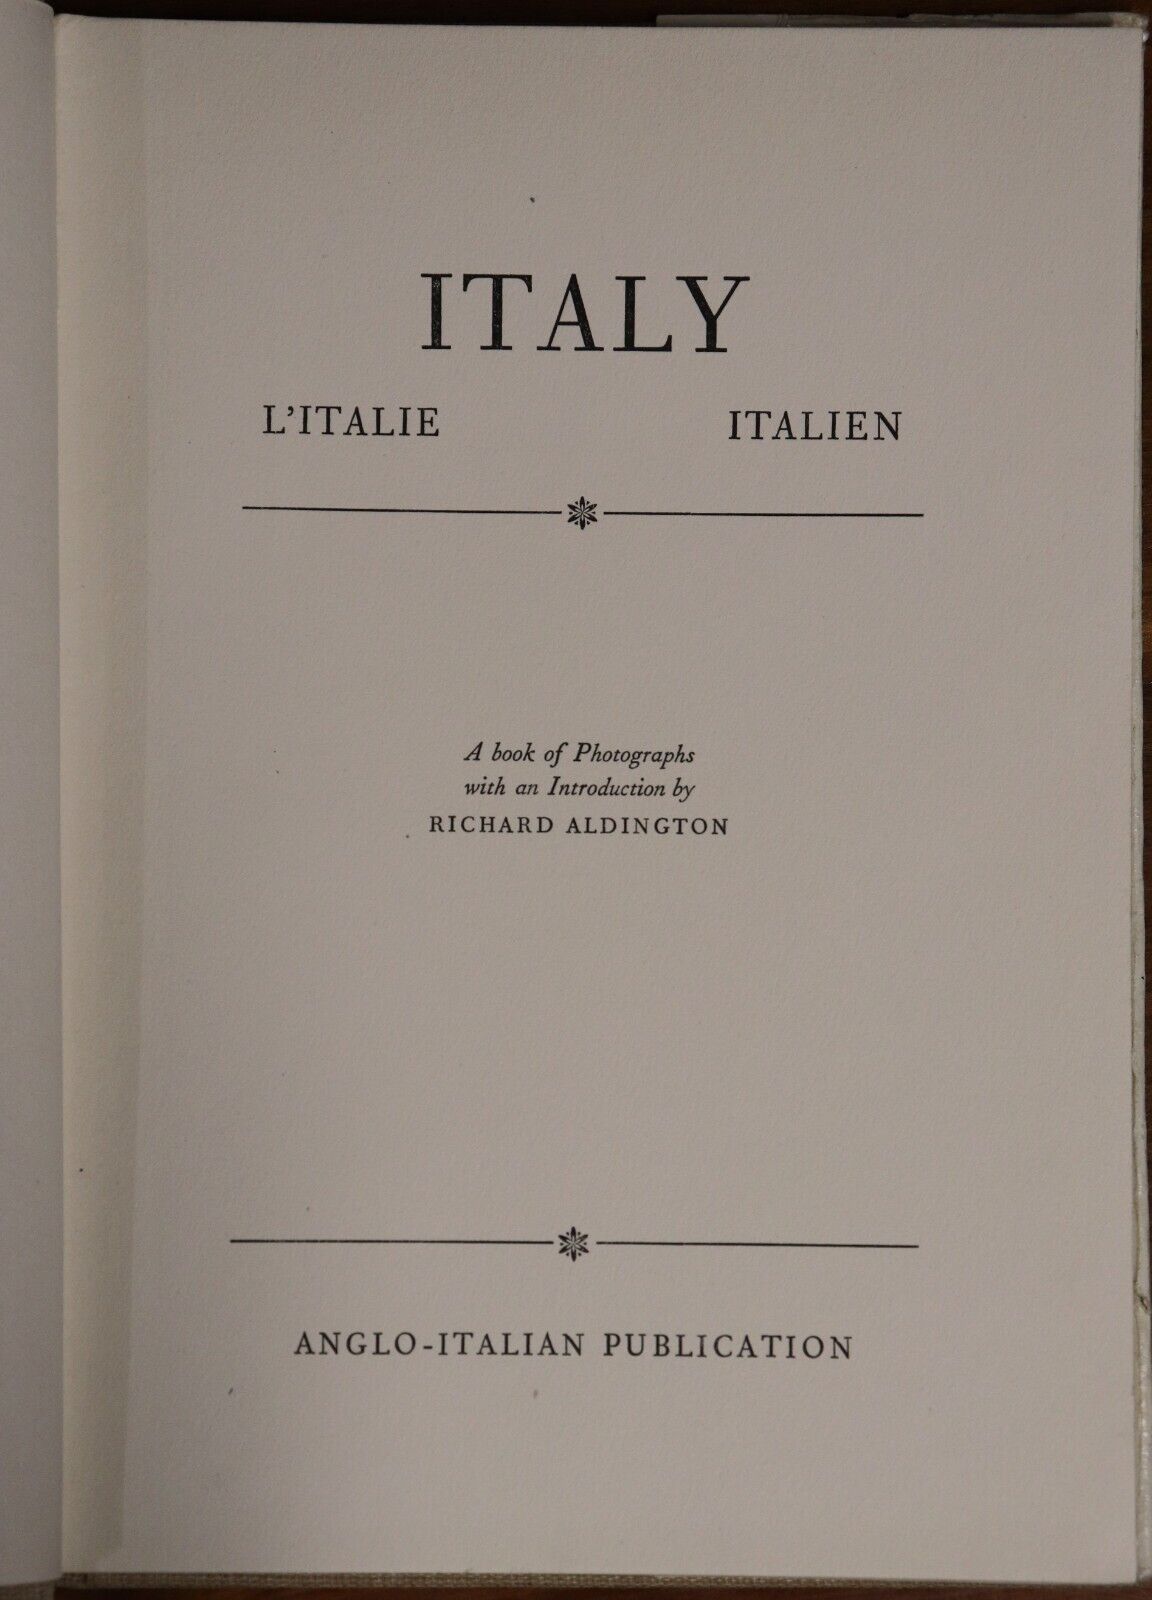 Italy: A Book Of Photographs - c1961 - Vintage Photo History Book - 0